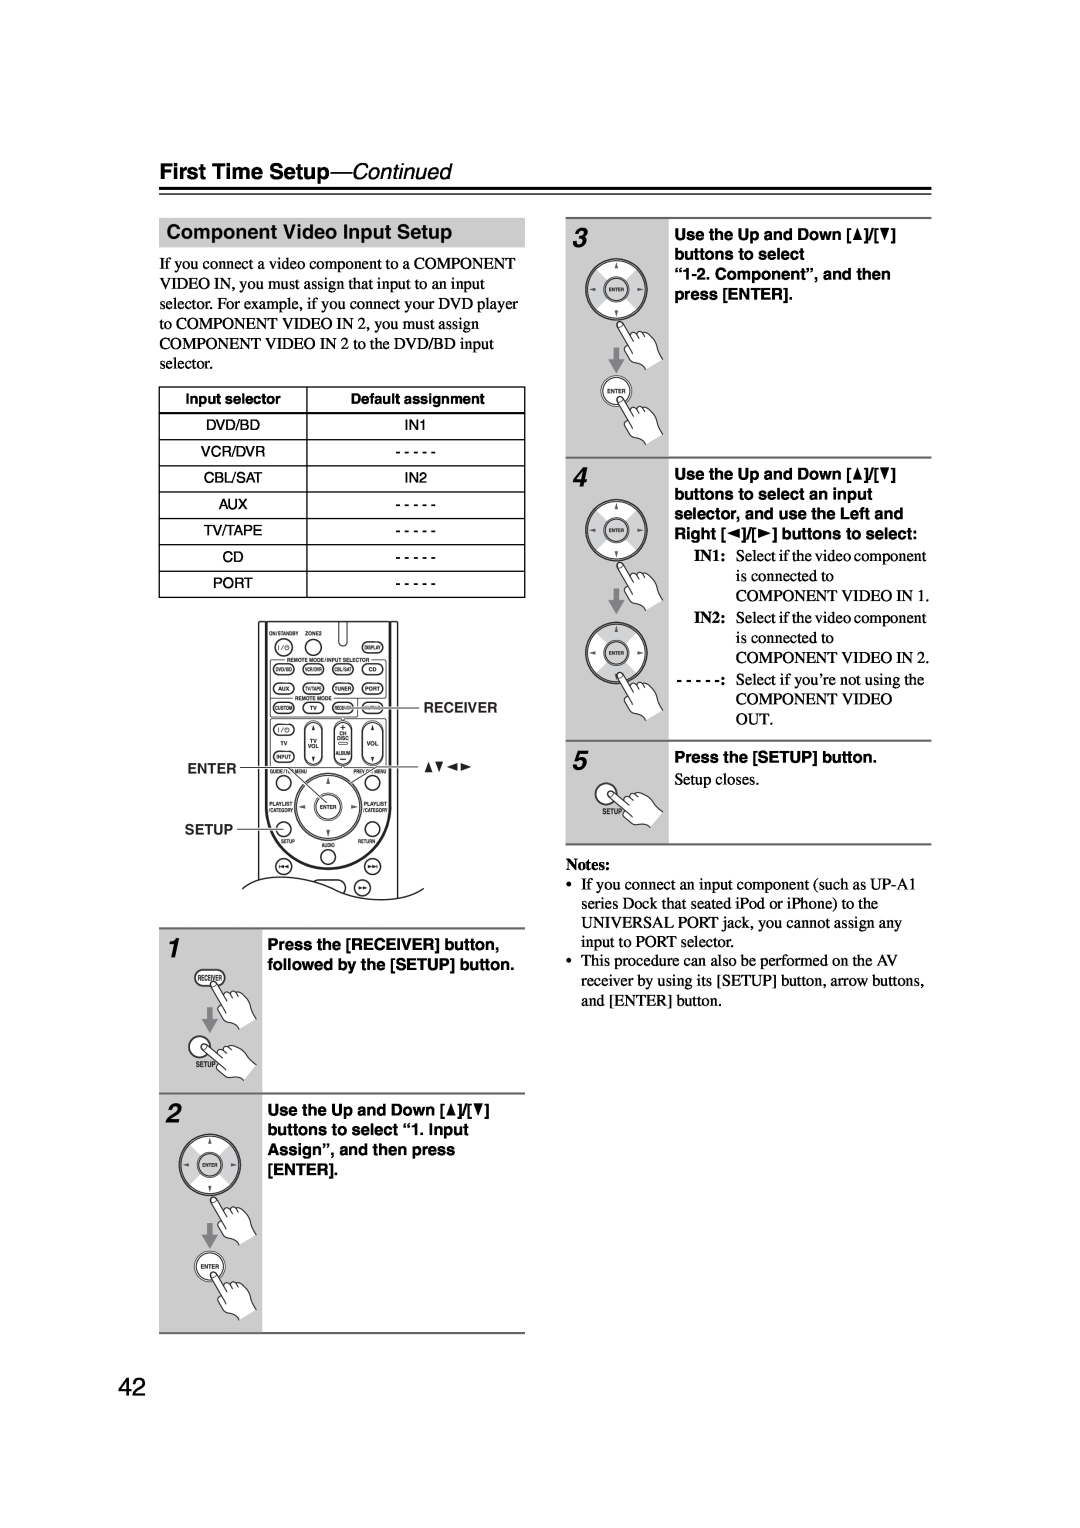 Onkyo 29344937, HT-S6200 instruction manual First Time Setup—Continued, Component Video Input Setup, Notes 